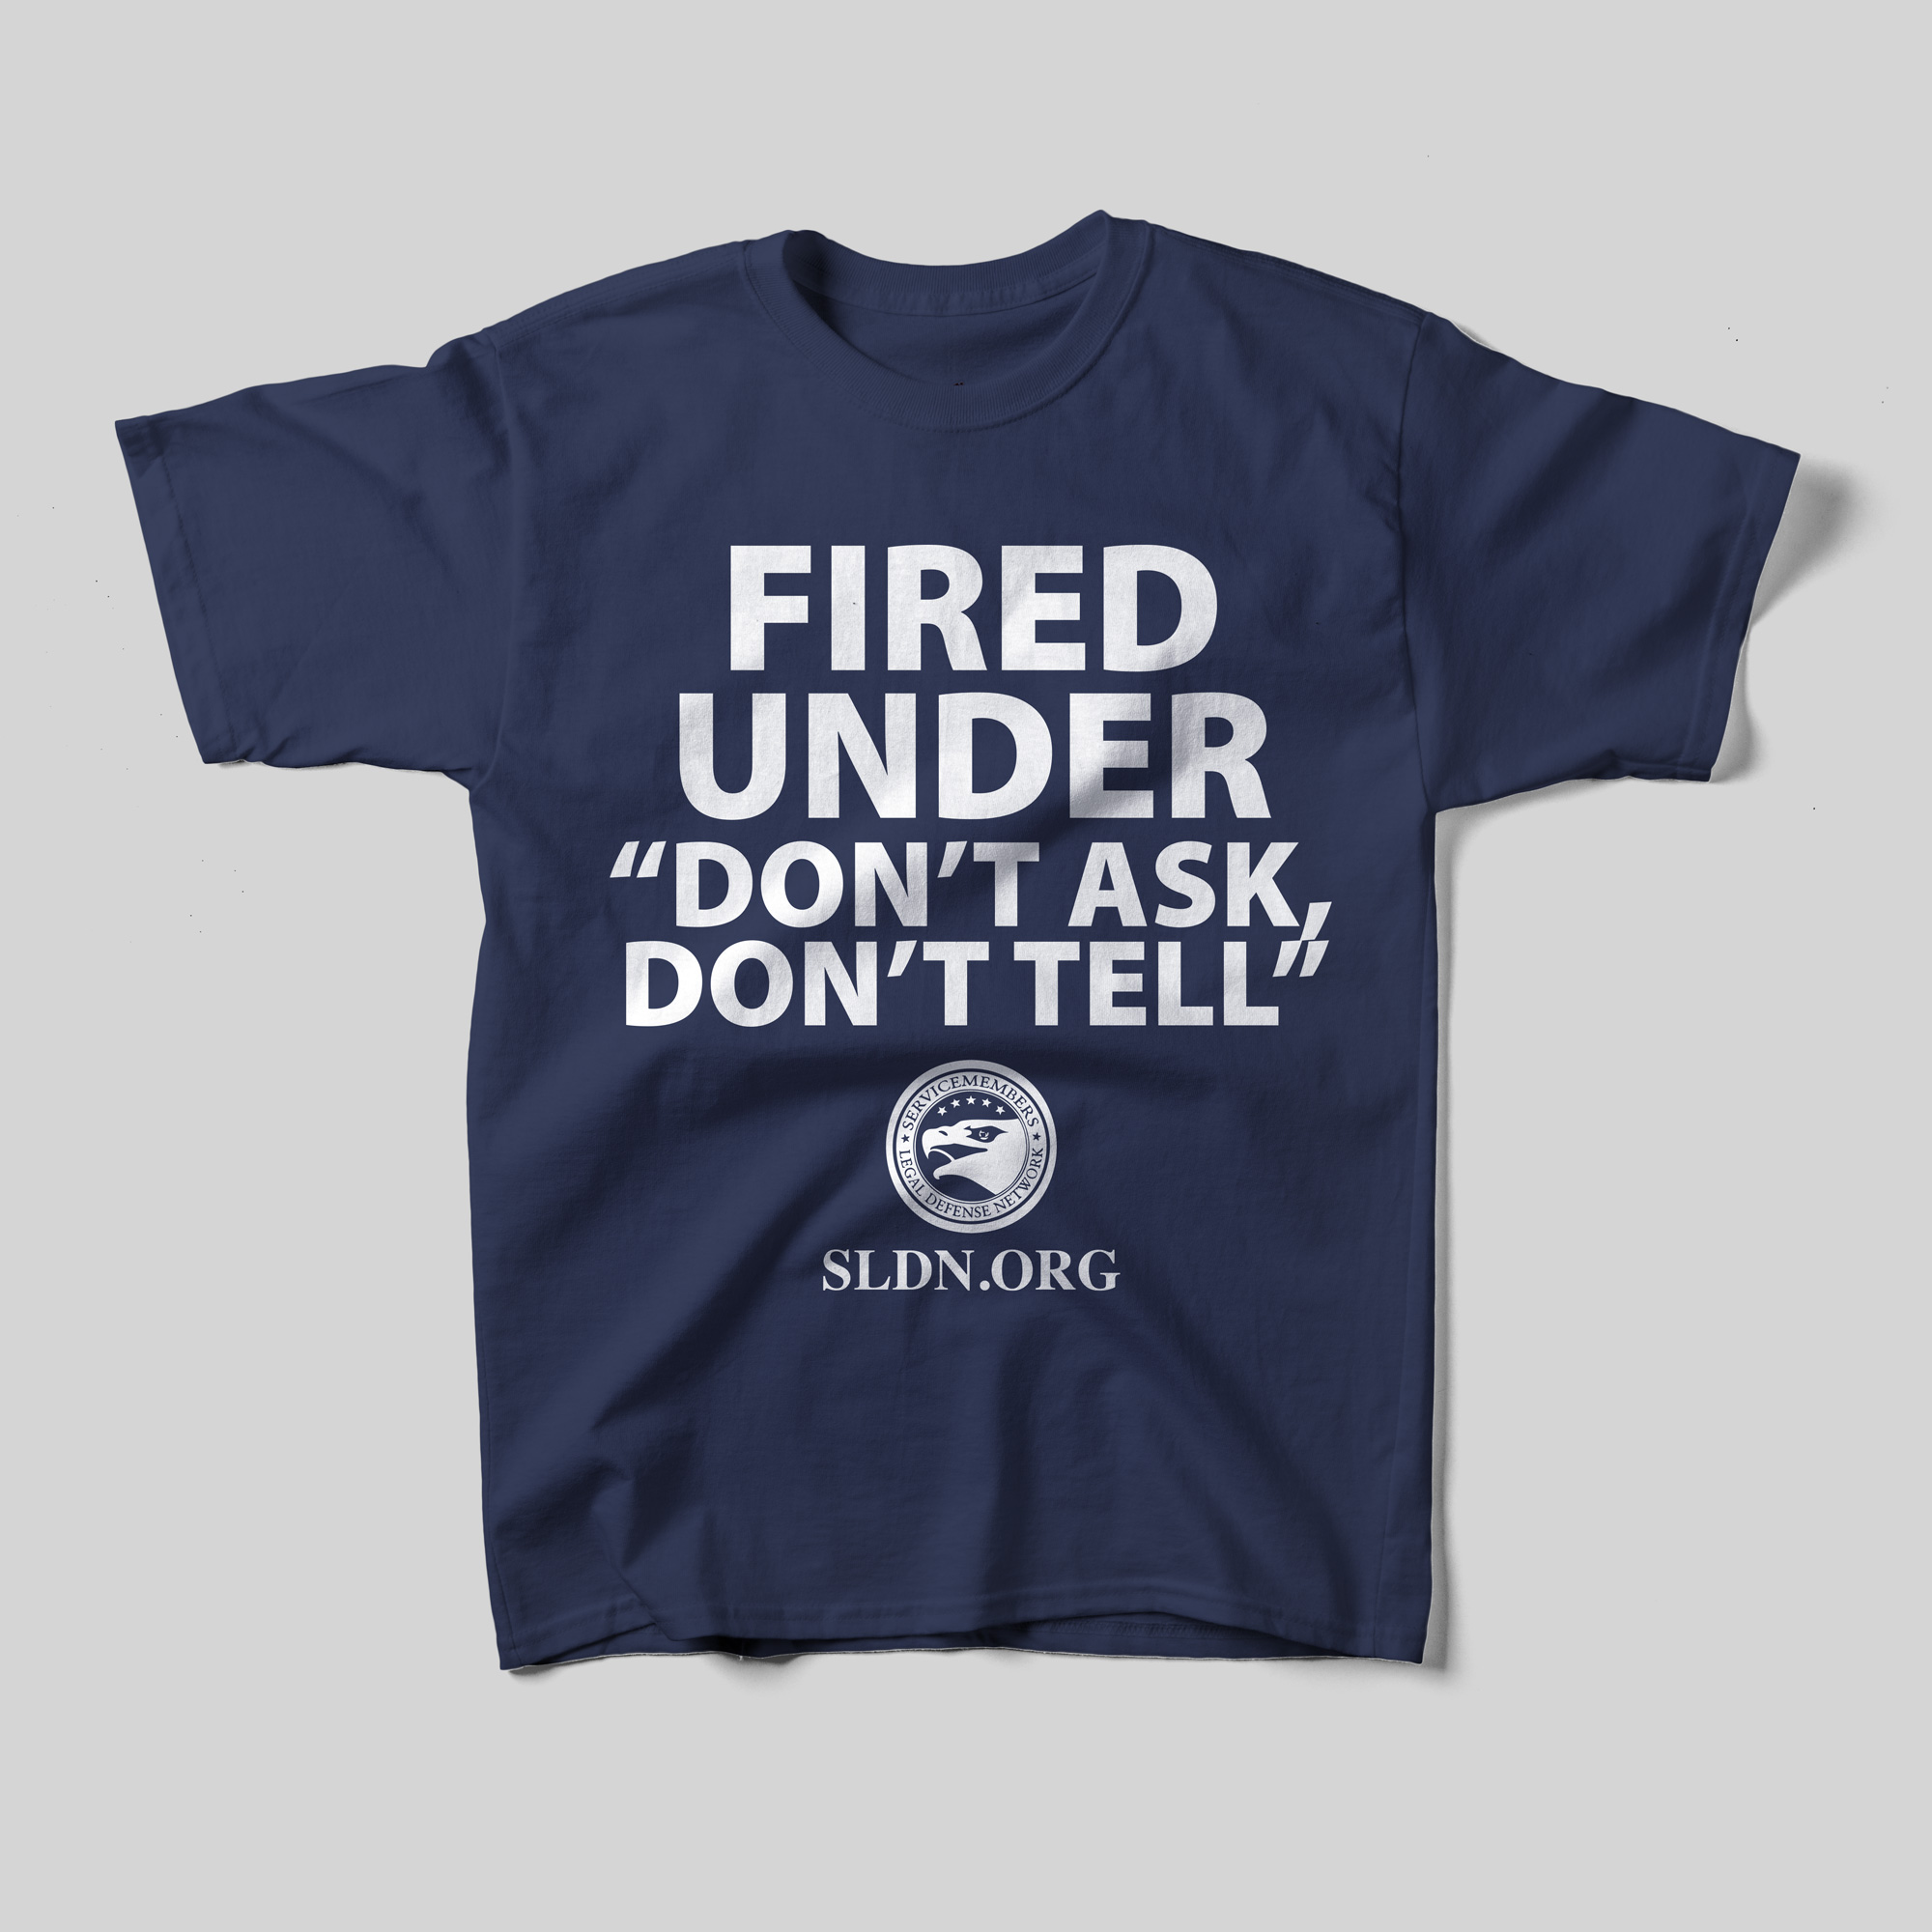 A navy blue shirt that reads, in white text, "Fired under 'Don't Ask, Don't Tell'" with the emblem for the Service Members Legal Defense Network and SLDN.org.